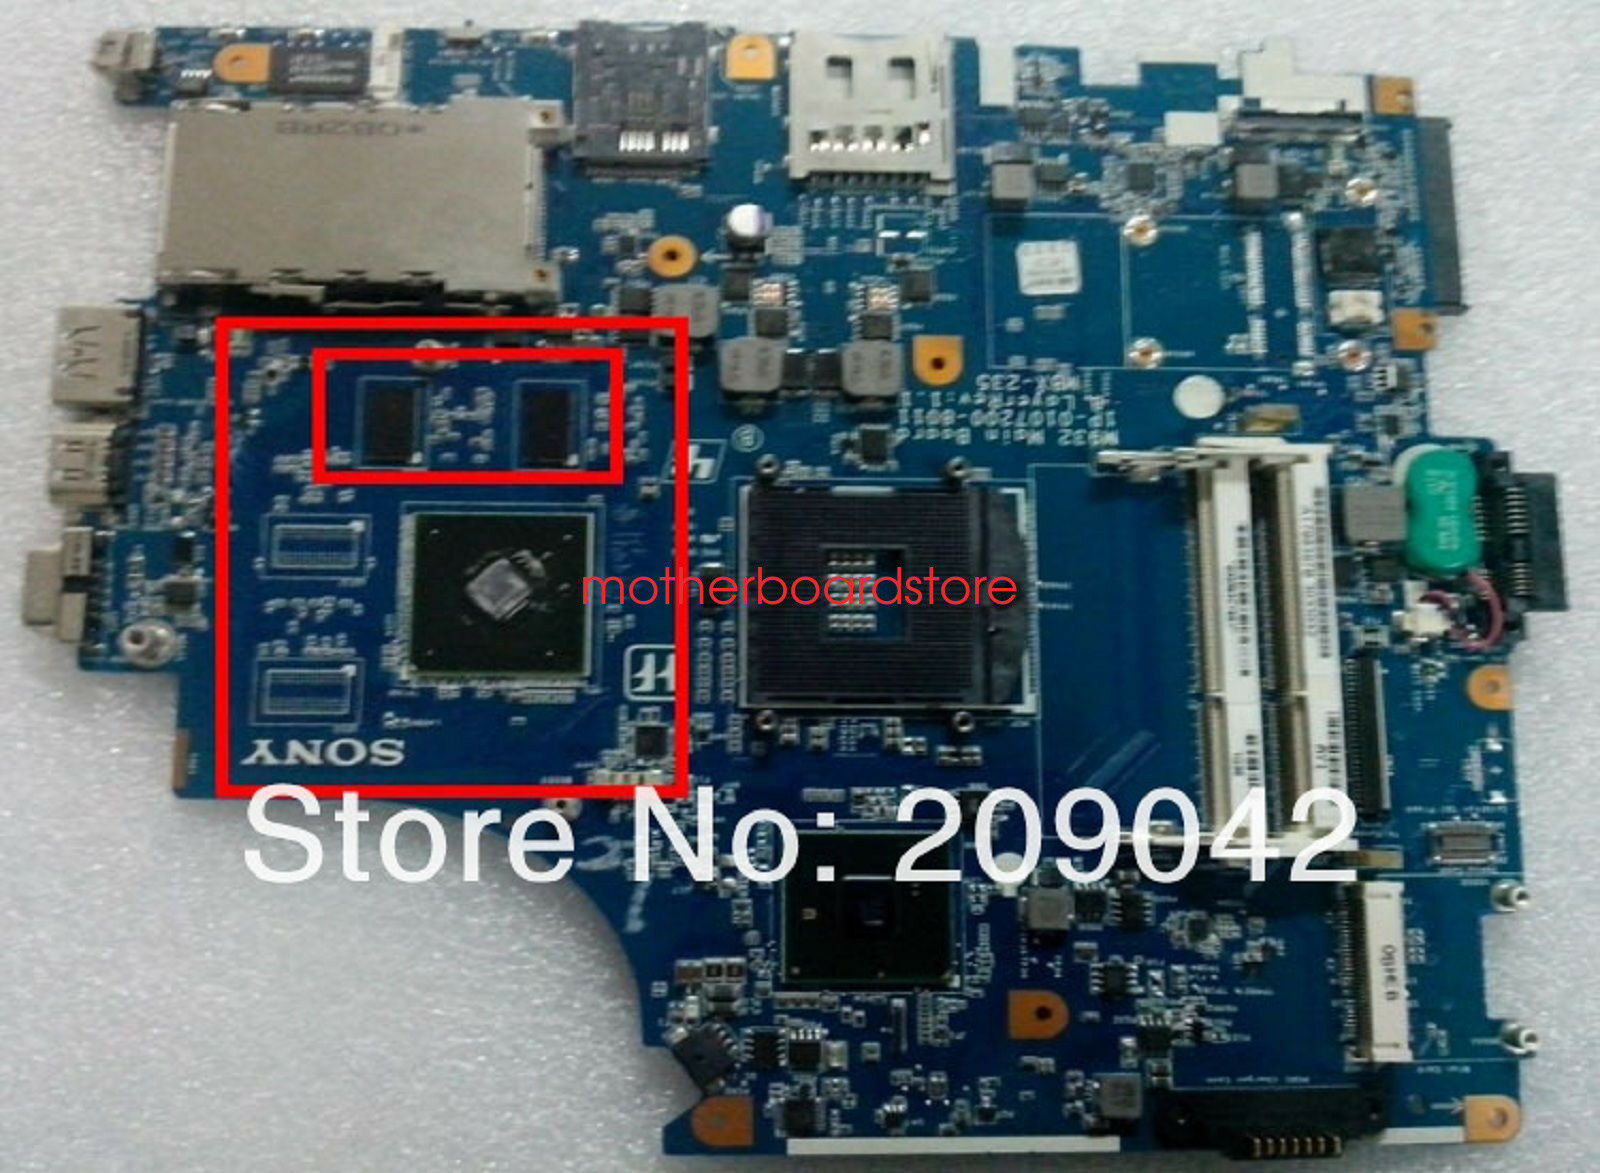 Sony VAIO VPCF1 Intel Motherboard MBX-235 M932 A1796397B 1P-0107J00-8011 Tested Compatible CPU Brand: Inte